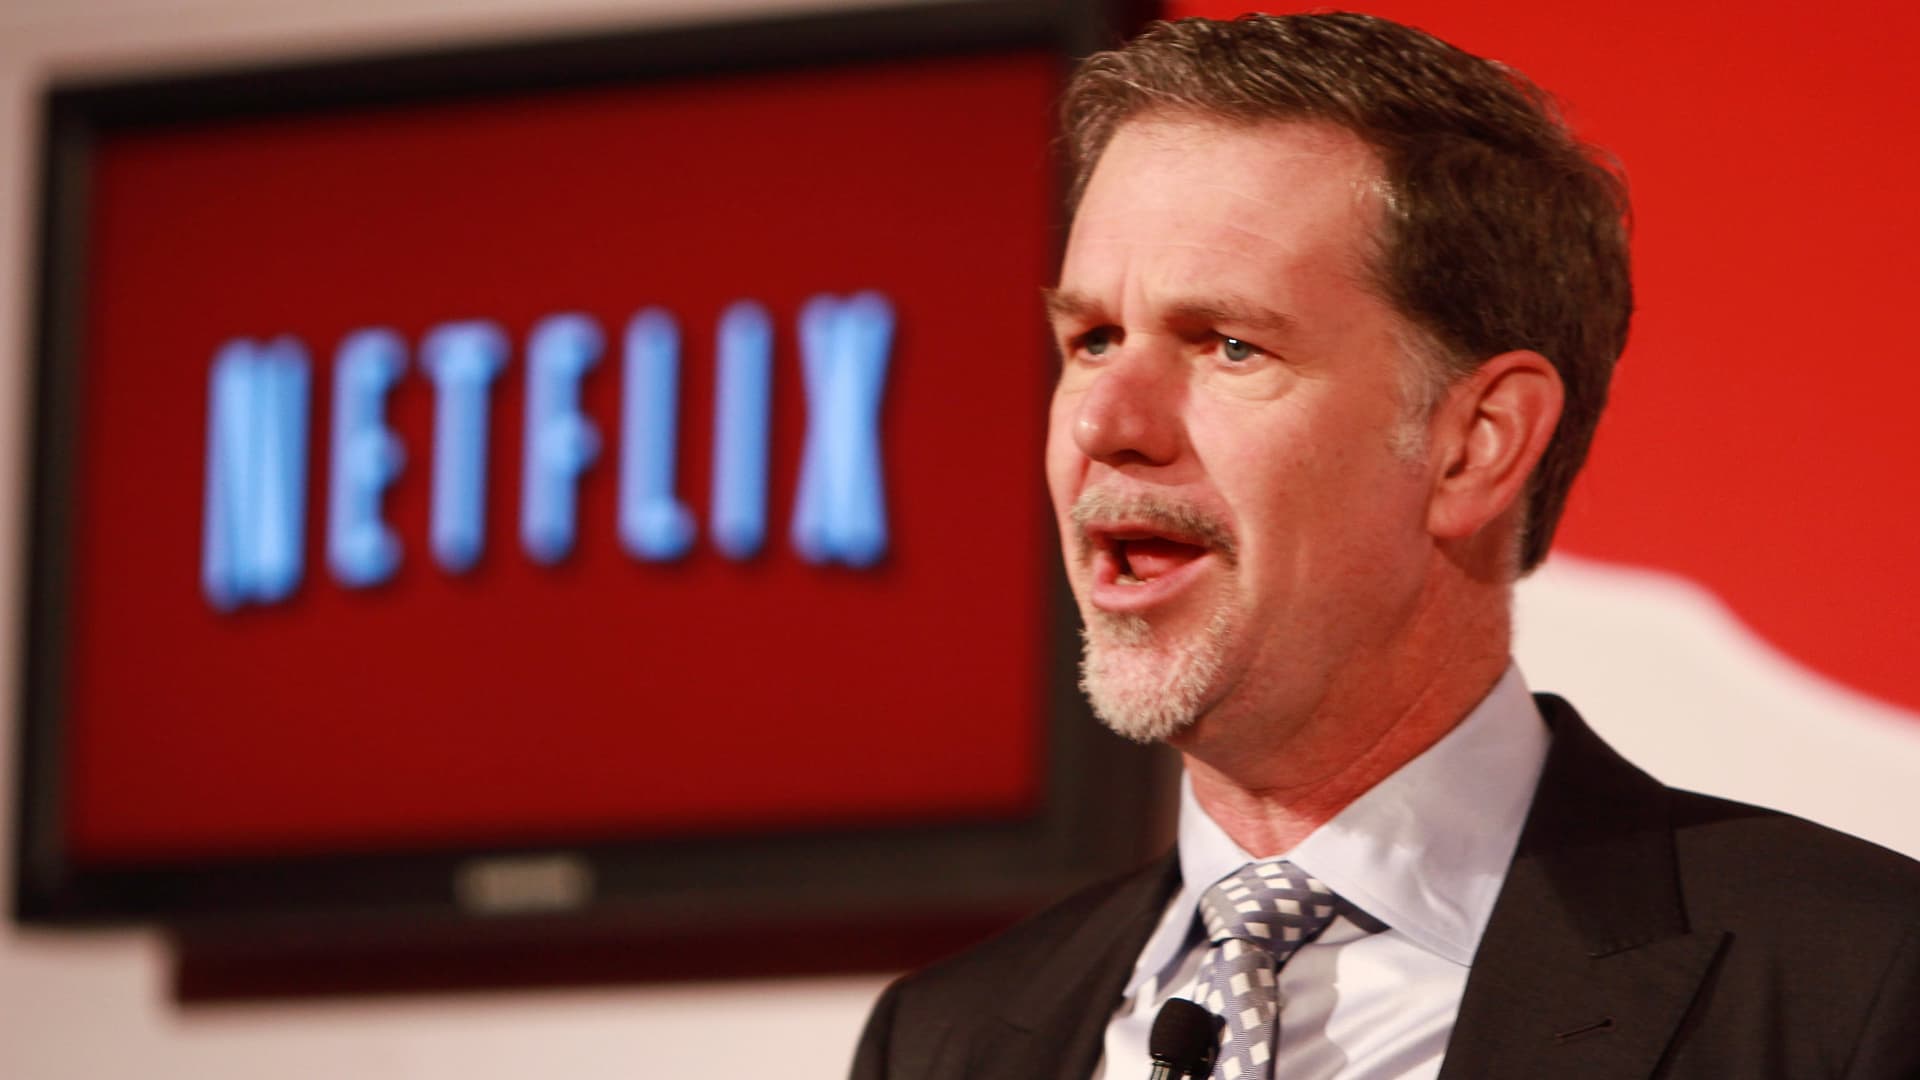 Netflix estimates 100 million households are sharing passwords and suggests a global crackdown is coming